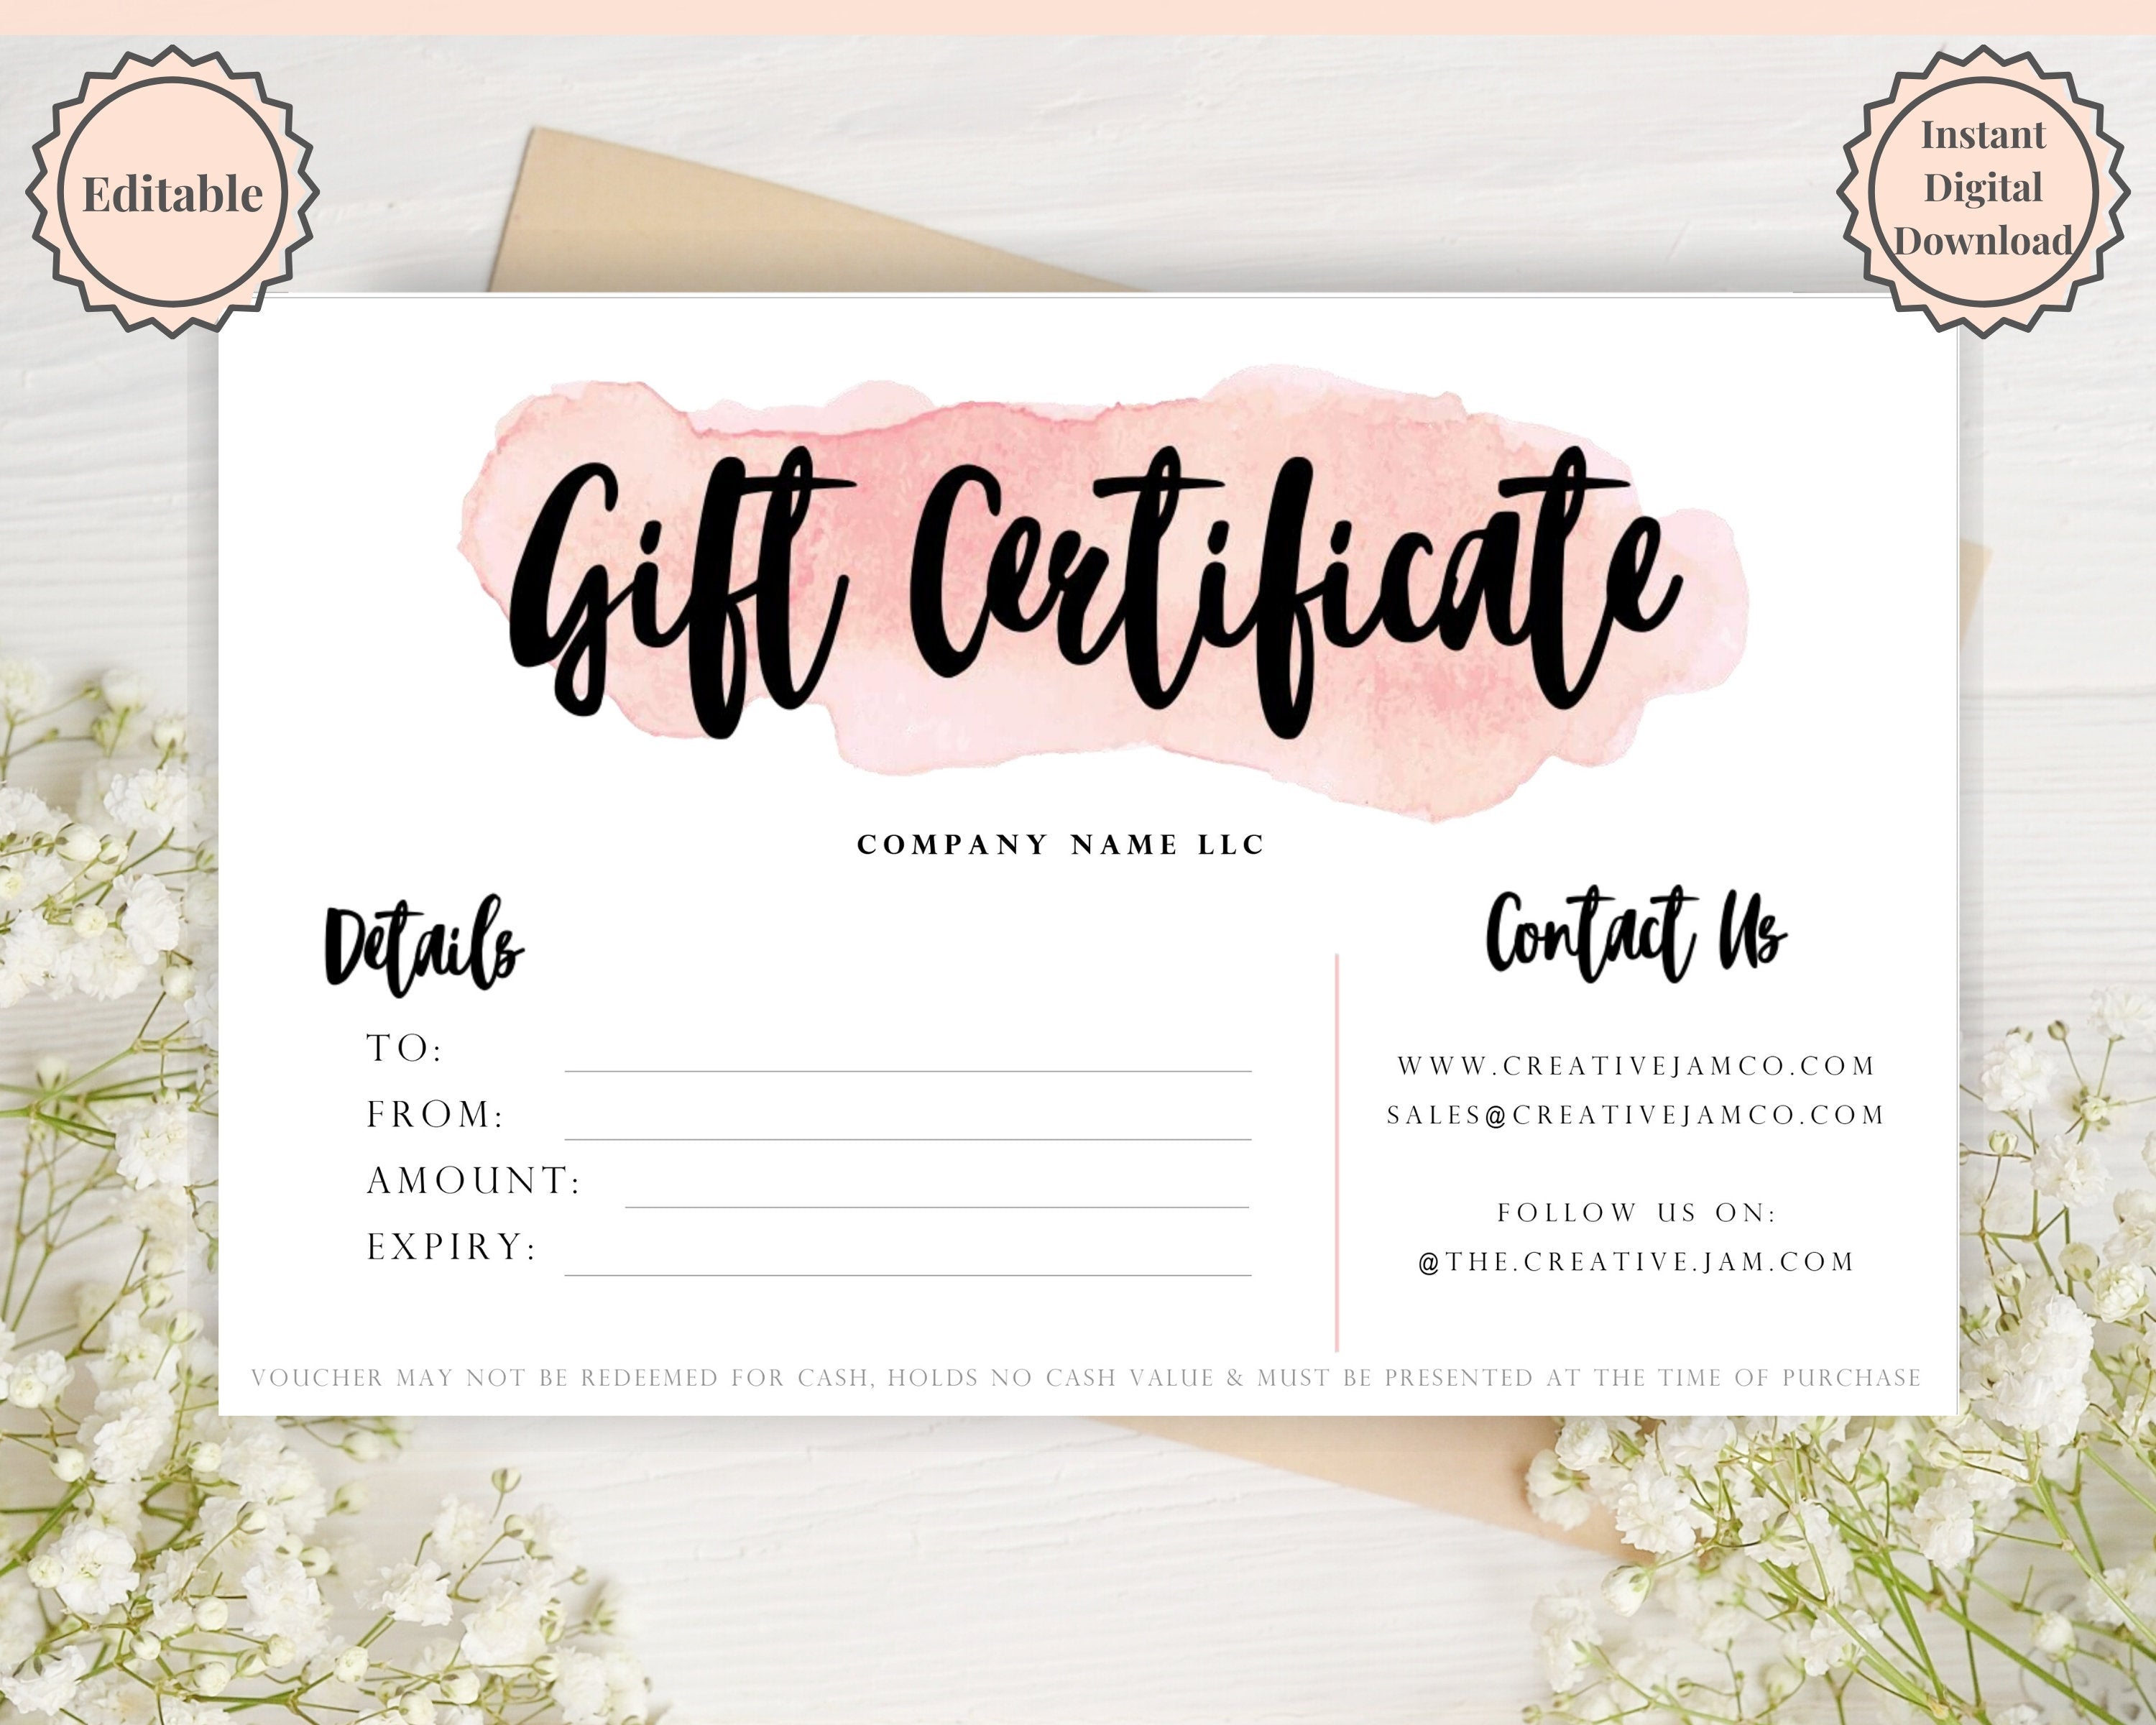 Download Free Gift Certificate Templates and Gift Cards